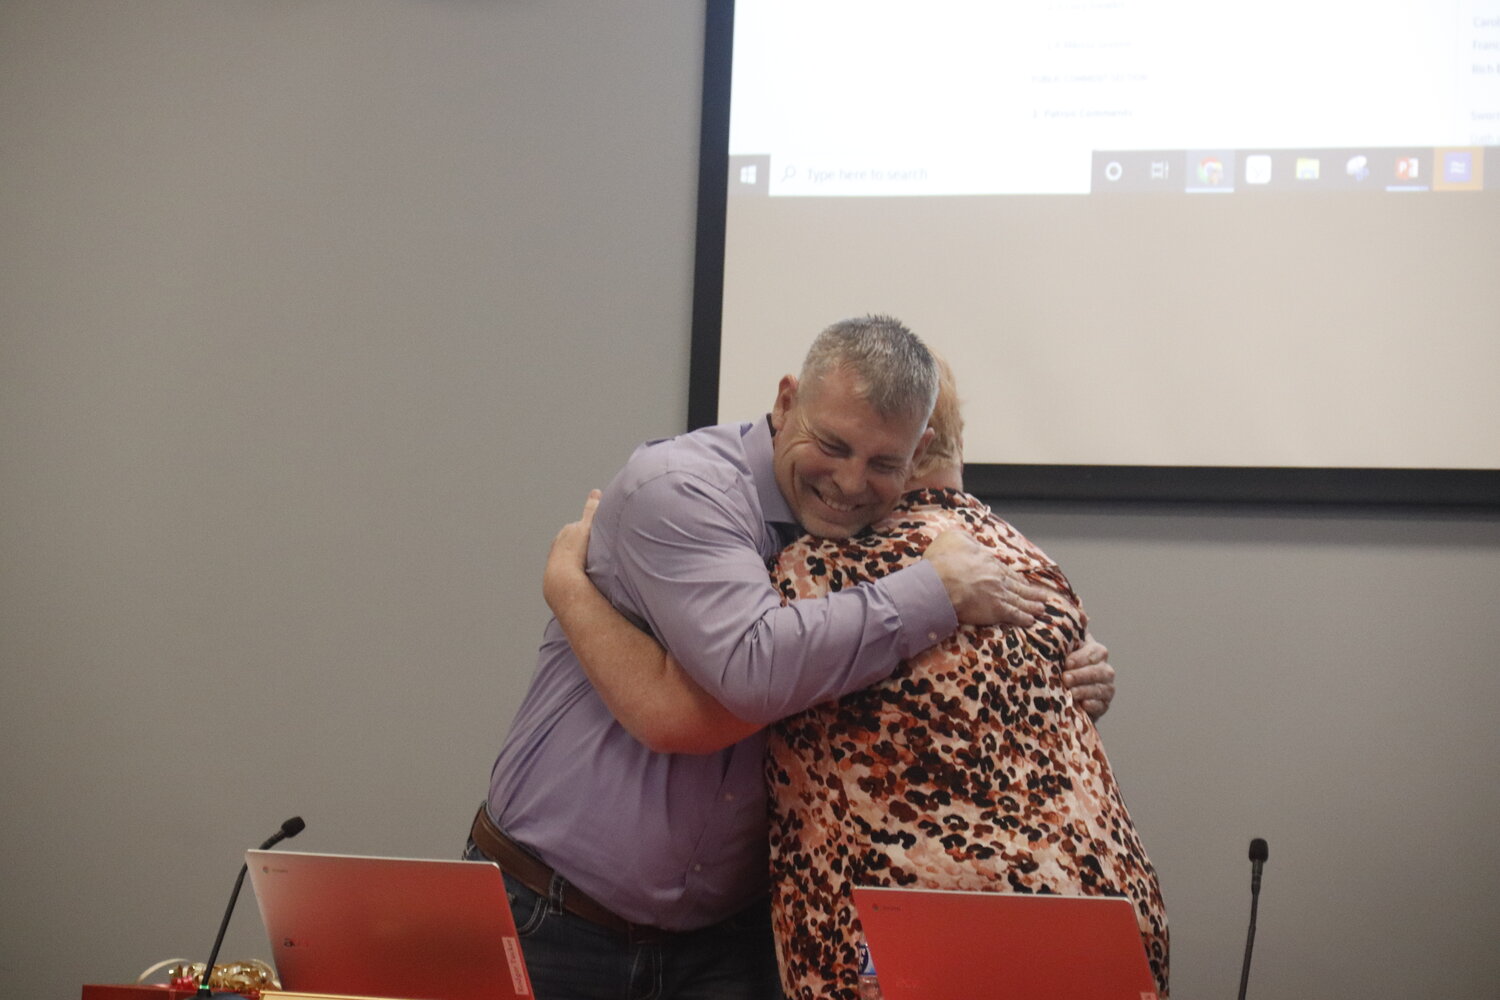 Former Warren County R-III school board member Rodger Tucker (left) hugs current board member Ginger Schenck during last week’s regular board meeting. Tucker decided not to run for reelection after serving on the school board for six years.